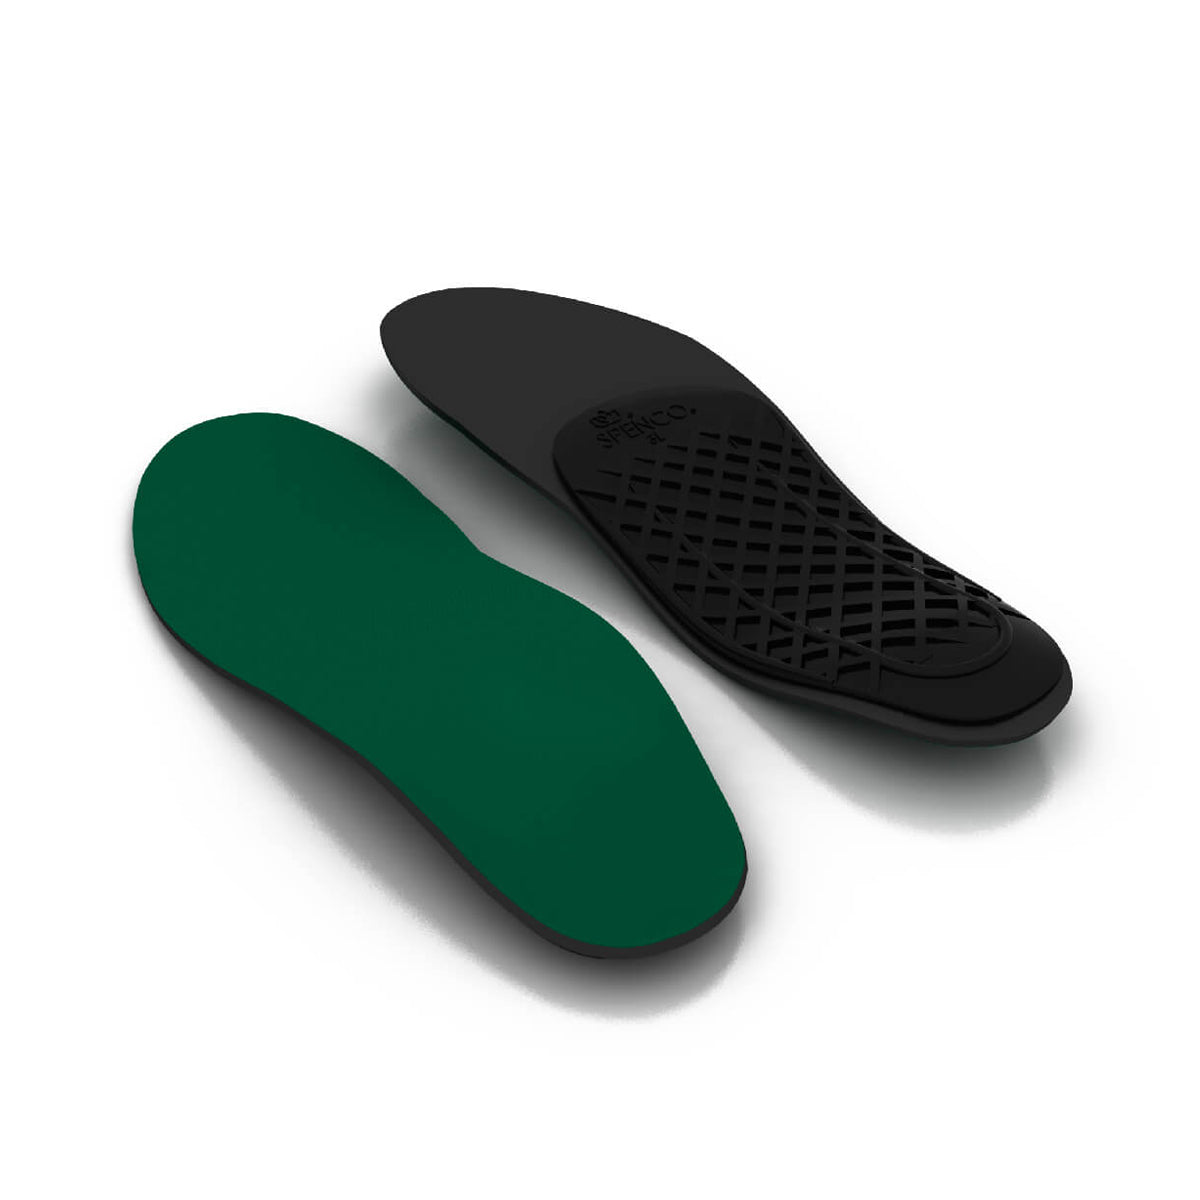 Spenco RX® Orthotic Arch Supports